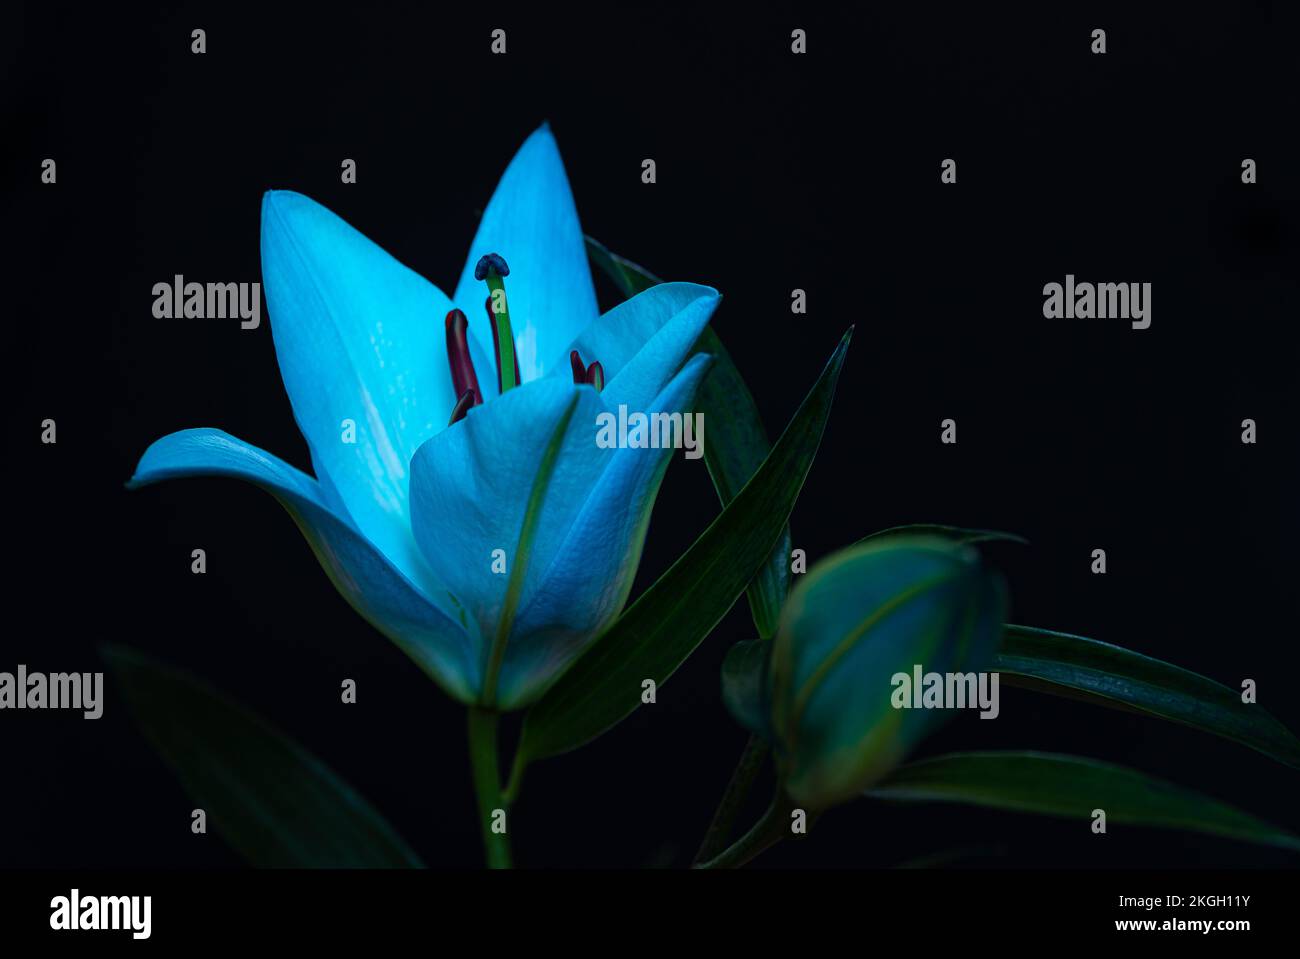 Blue and turquoise lily flowers on black background. Close up. Stock Photo